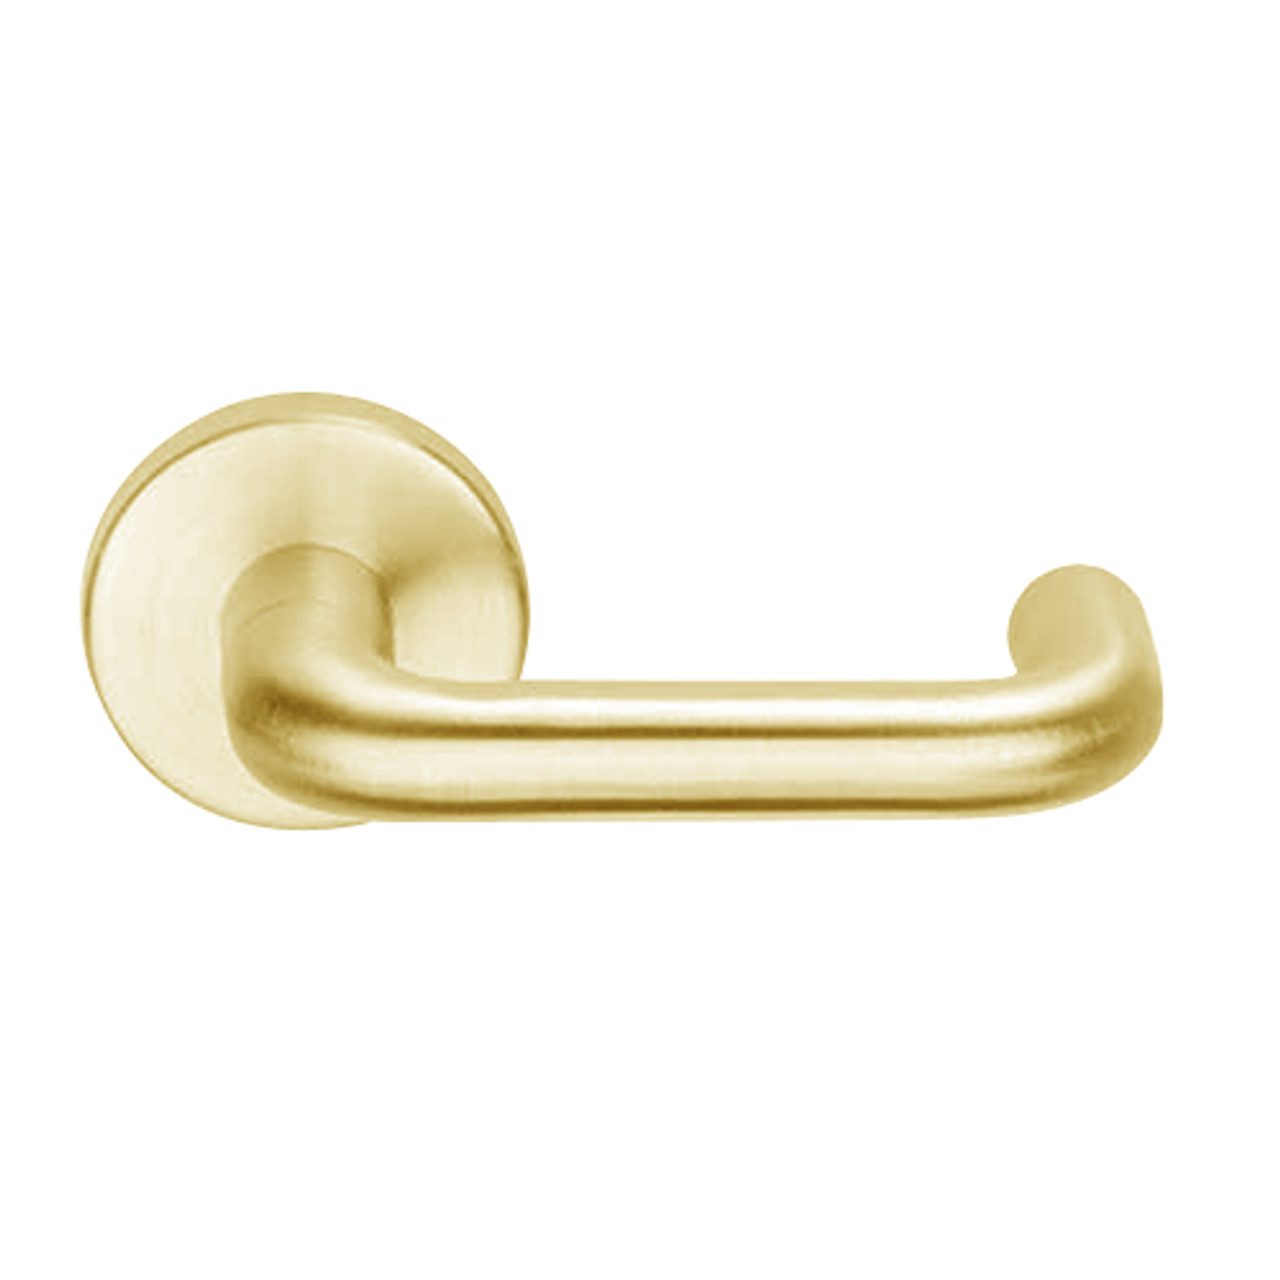 L9060P-03B-605 Schlage L Series Apartment Entrance Commercial Mortise Lock with 03 Cast Lever Design in Bright Brass